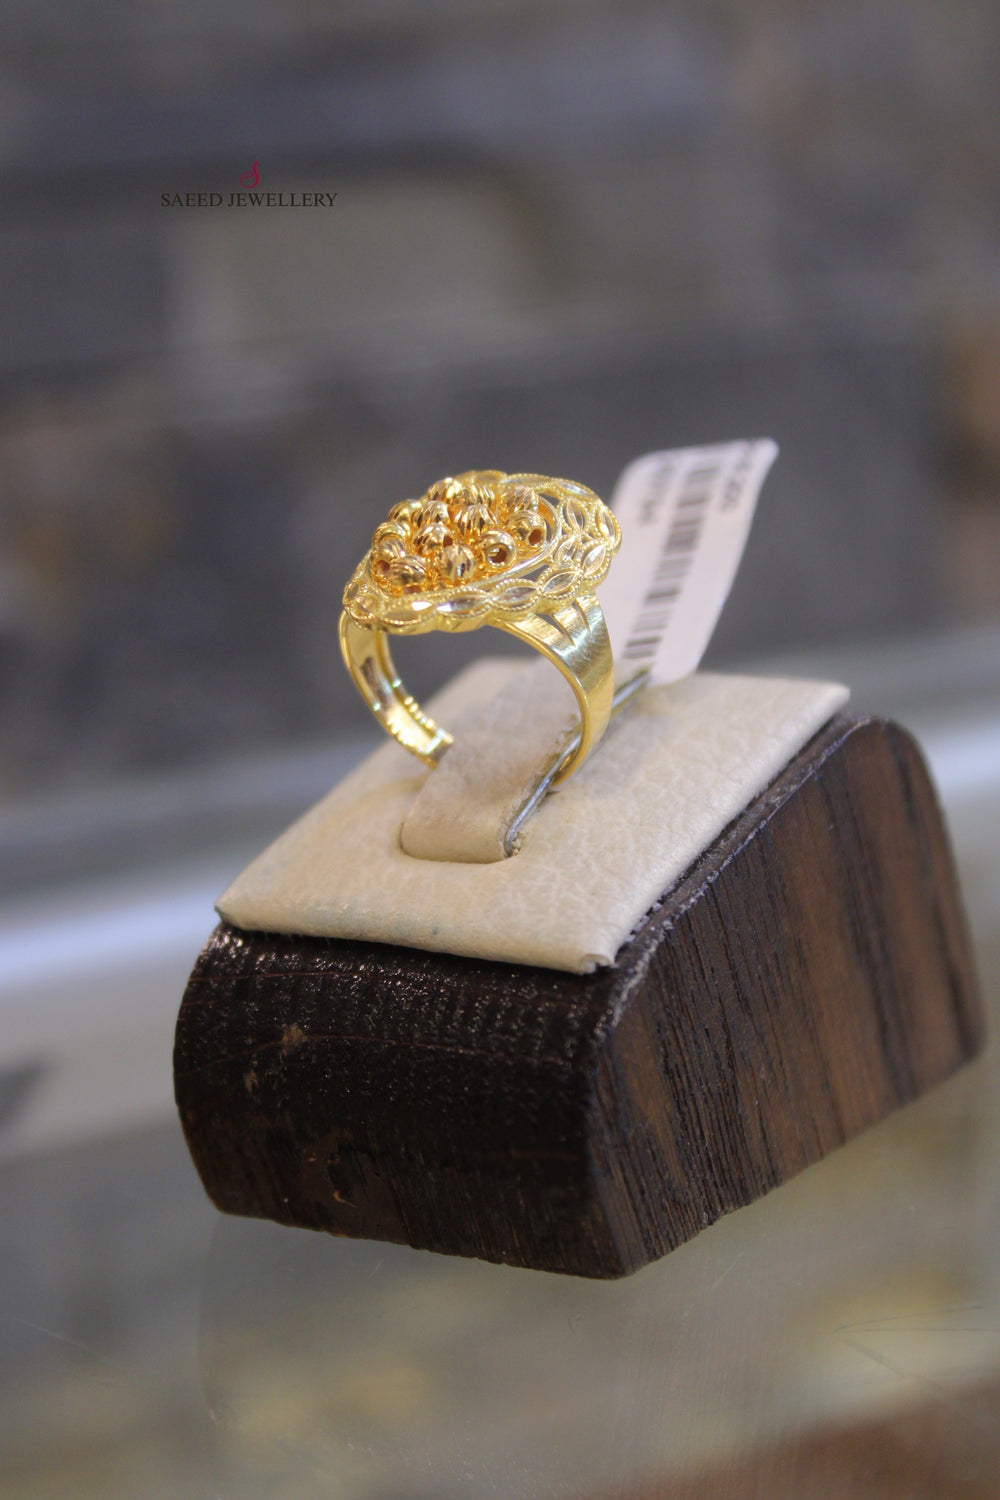 21K Gold Turkish Fancy Ring by Saeed Jewelry - Image 2